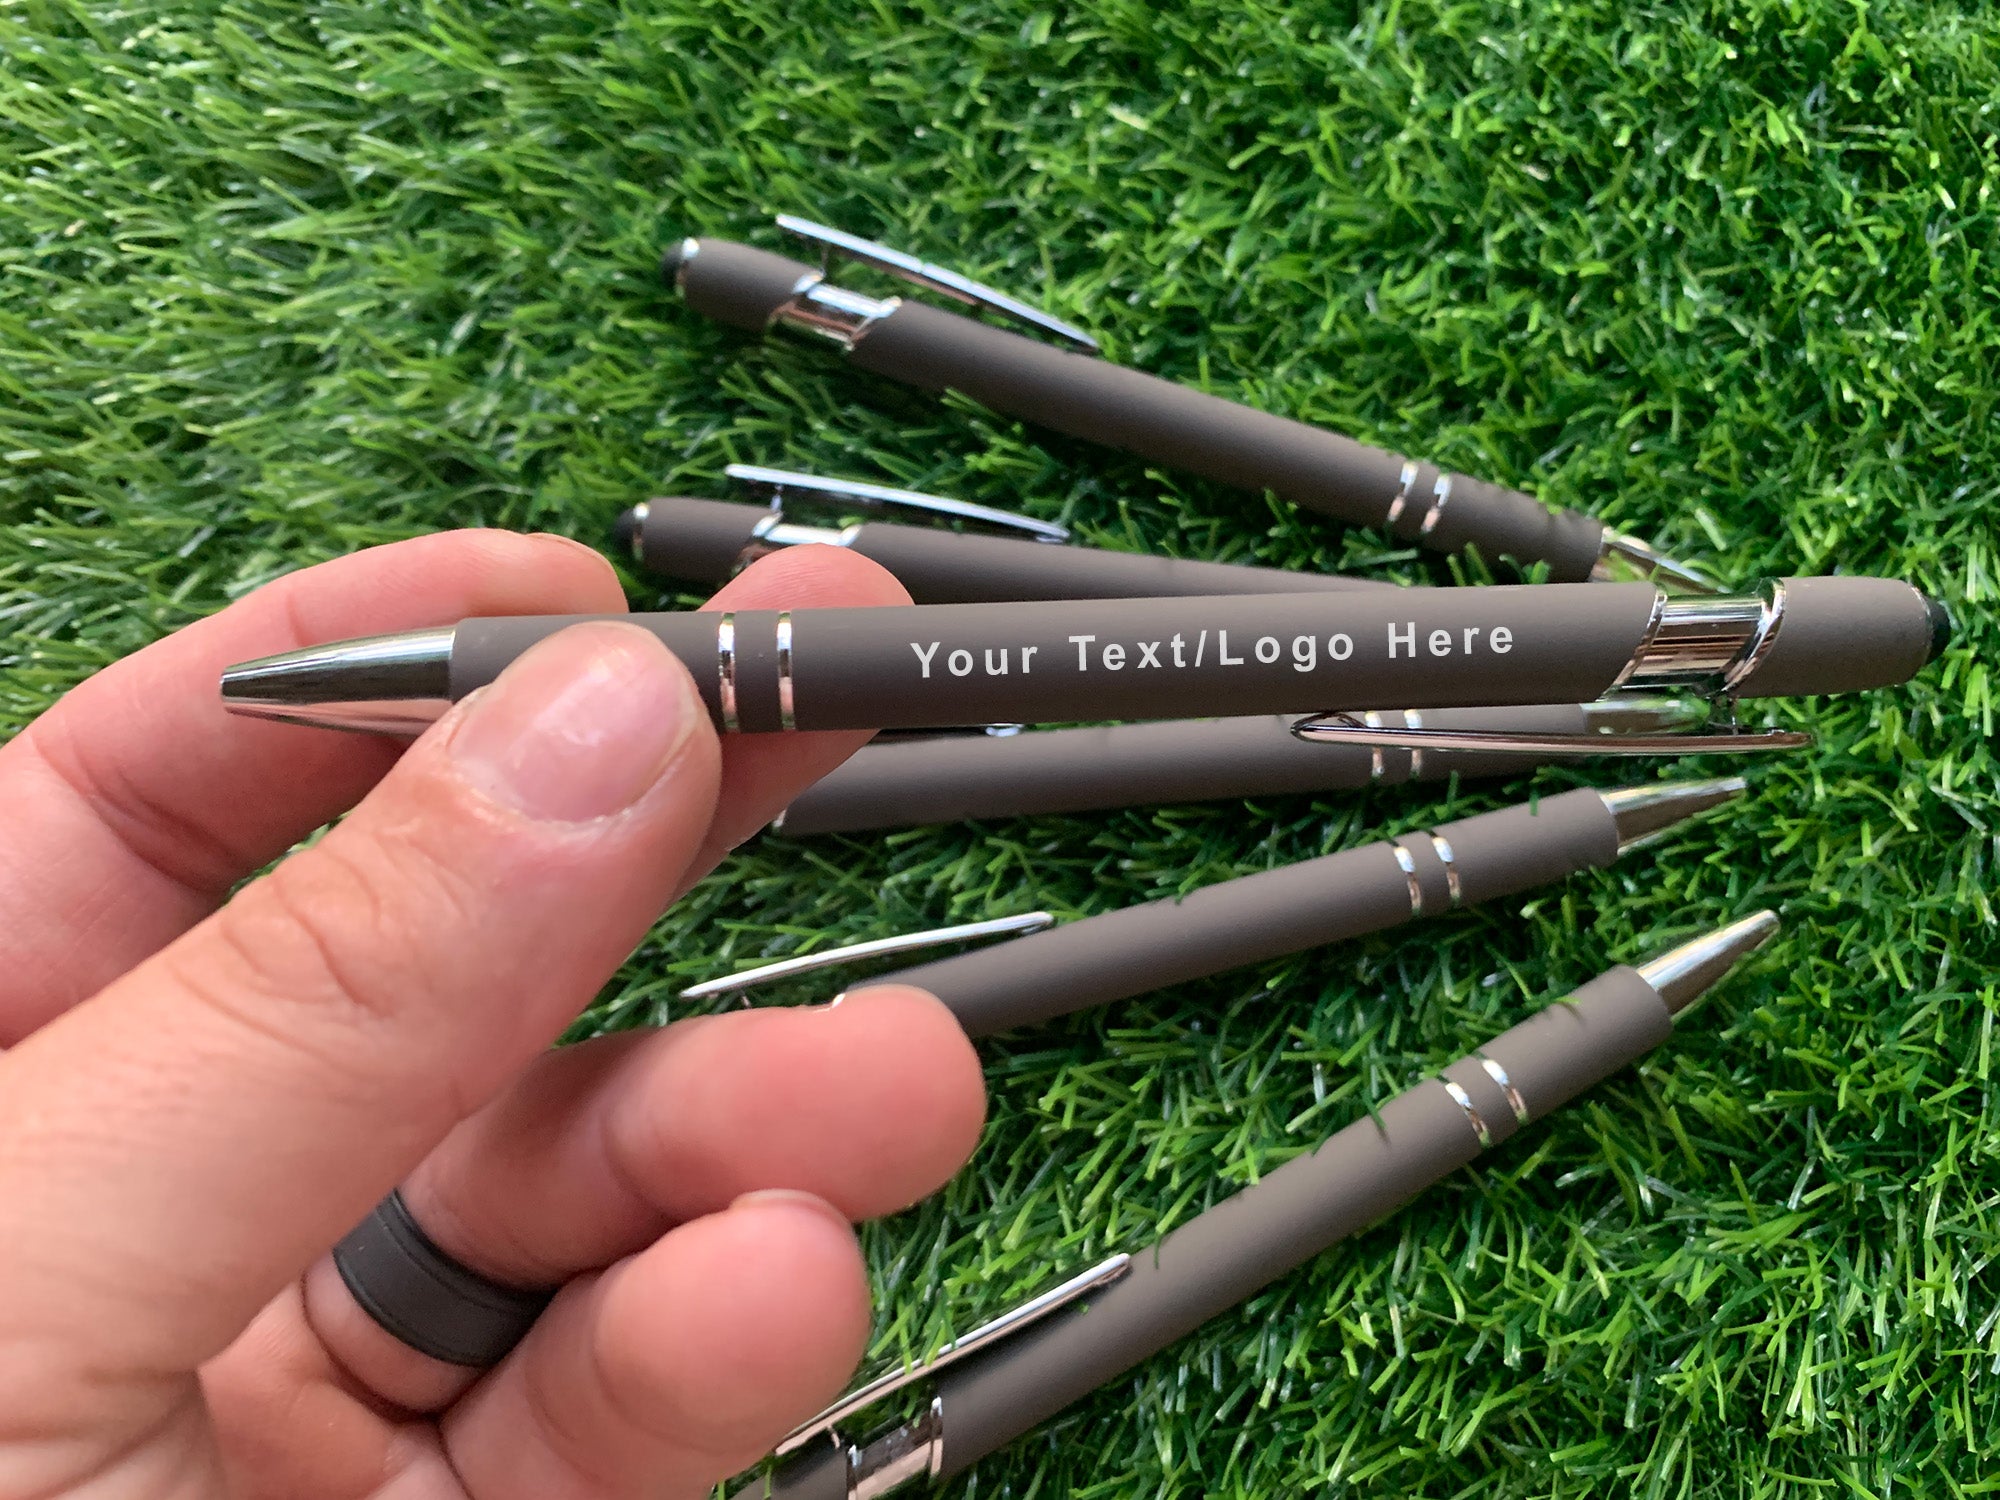 Gray Metal Soft Touch Pens